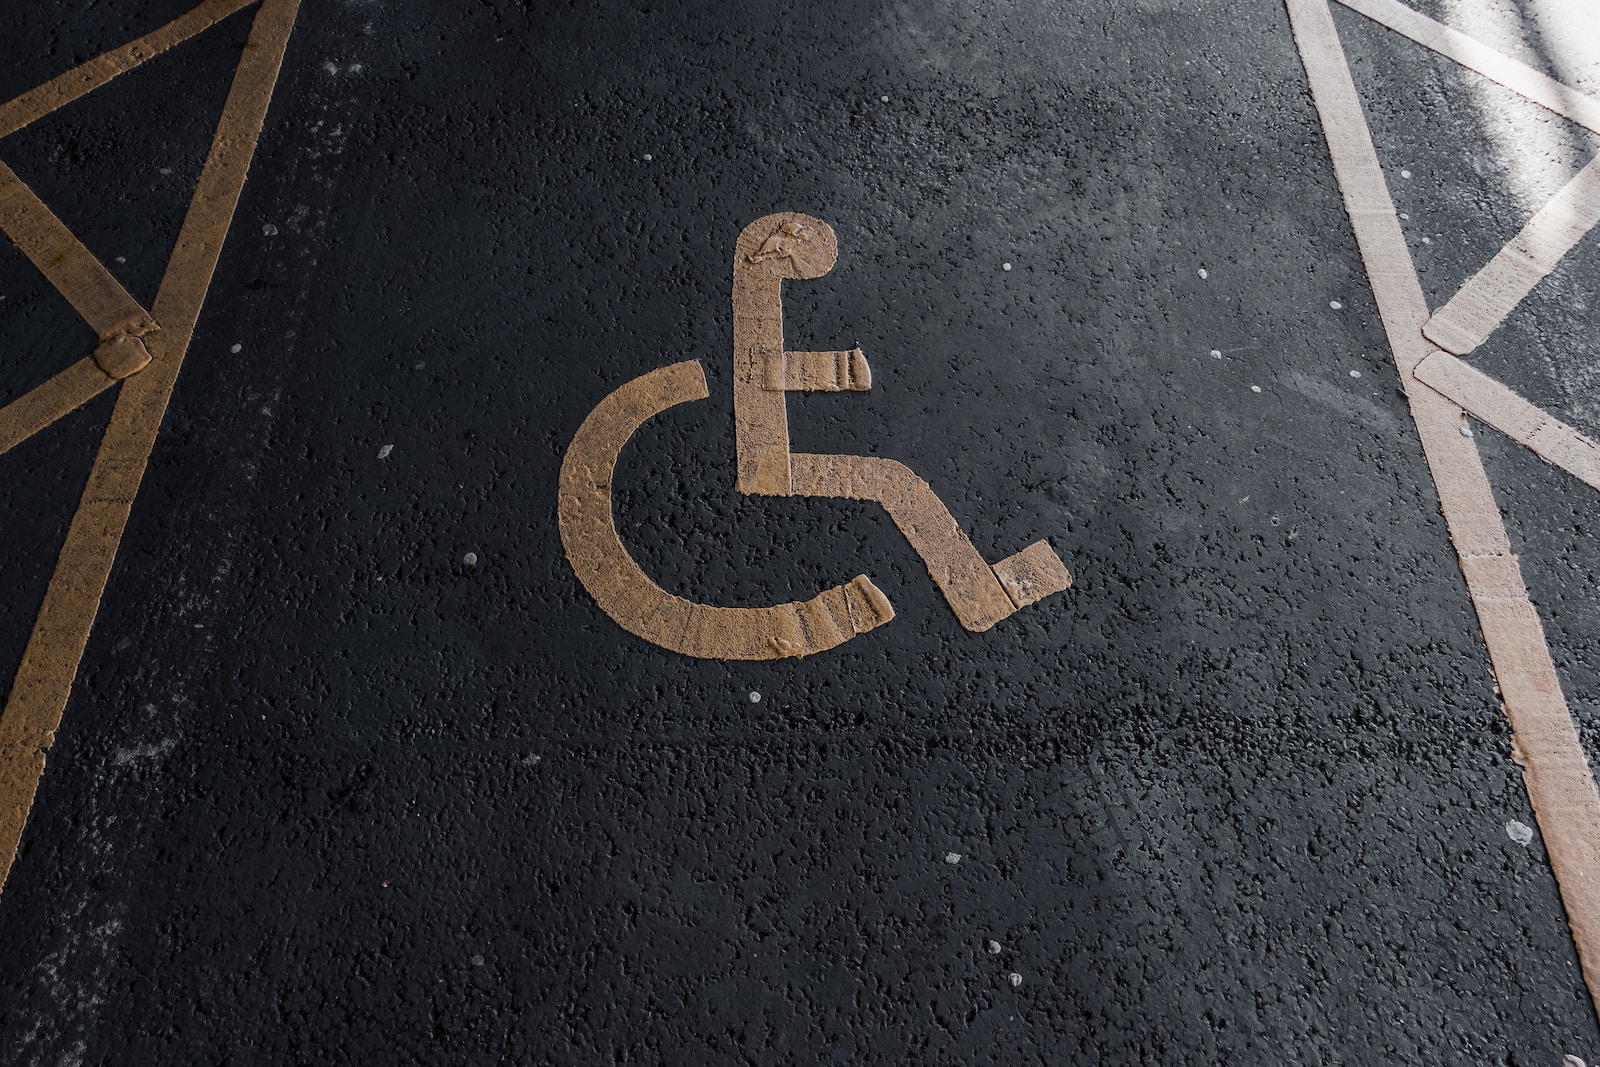 a handicapped sign on the ground in a parking lot